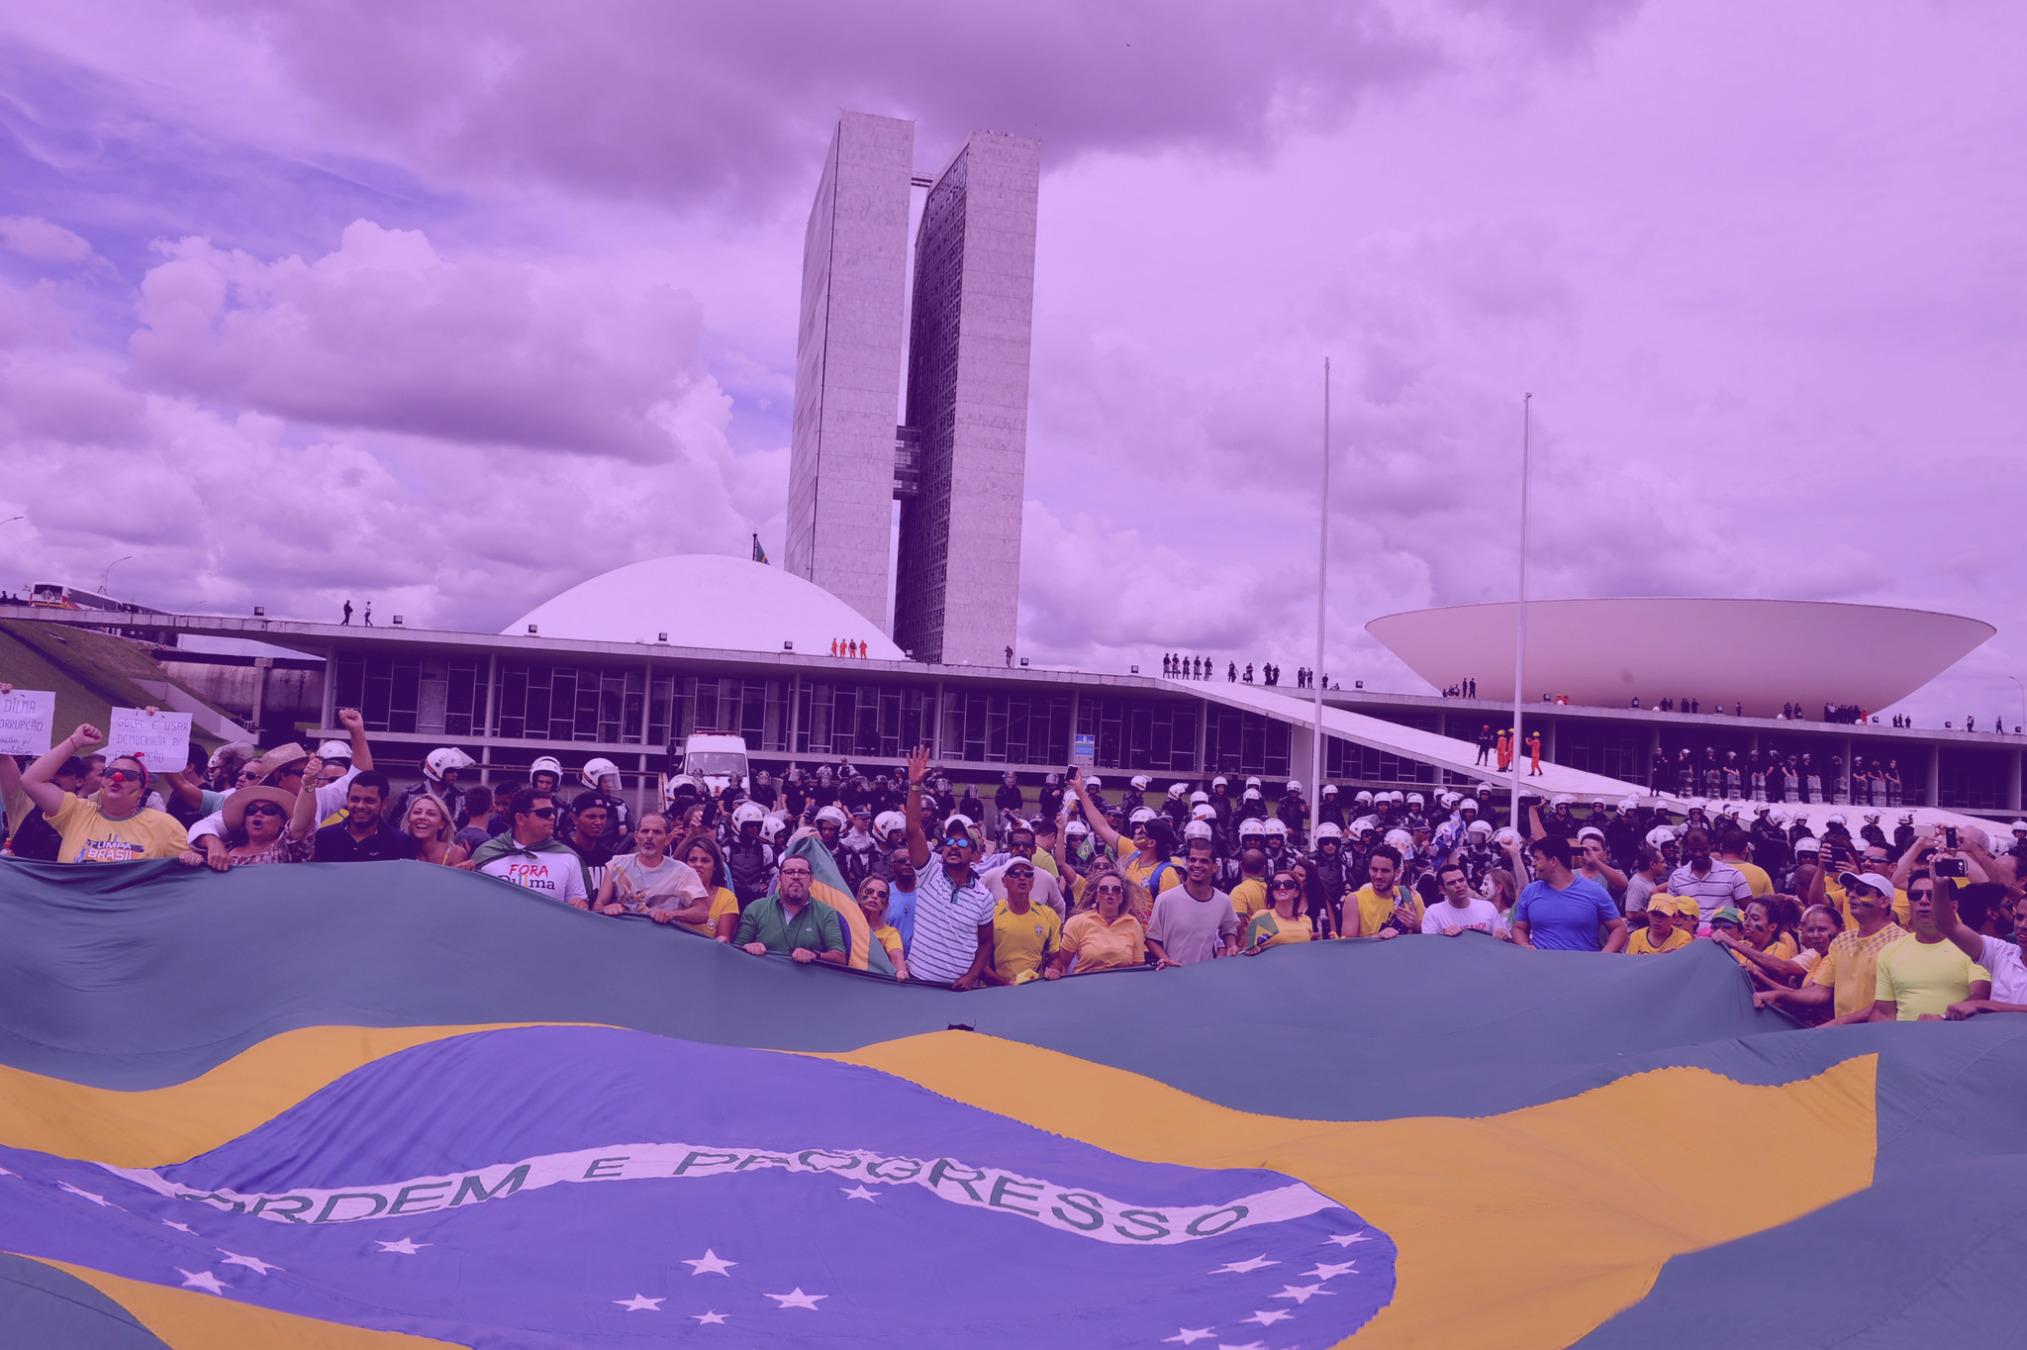 Thomas Bustamante and Emílio Peluso Neder Meyer – Legislative resistance to illiberalism in a system of coalitional presidentialism: will it work in Brazil?